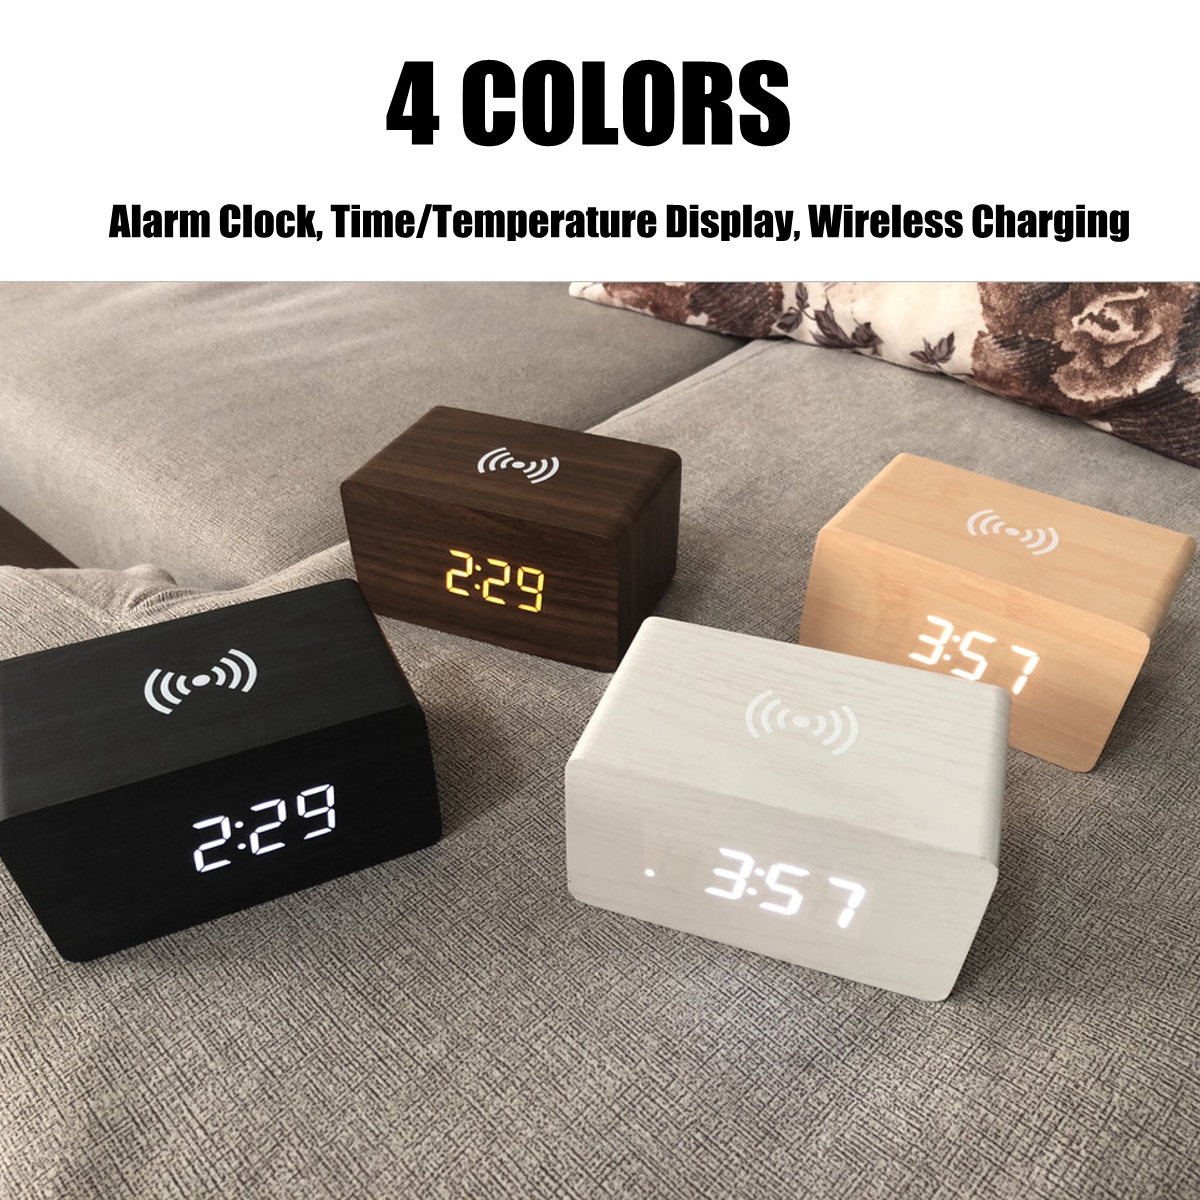 Digital-Thermometer-LED-Desk-Alarm-Clock-With--Wireless-Charger-For-Phone-1587803-5